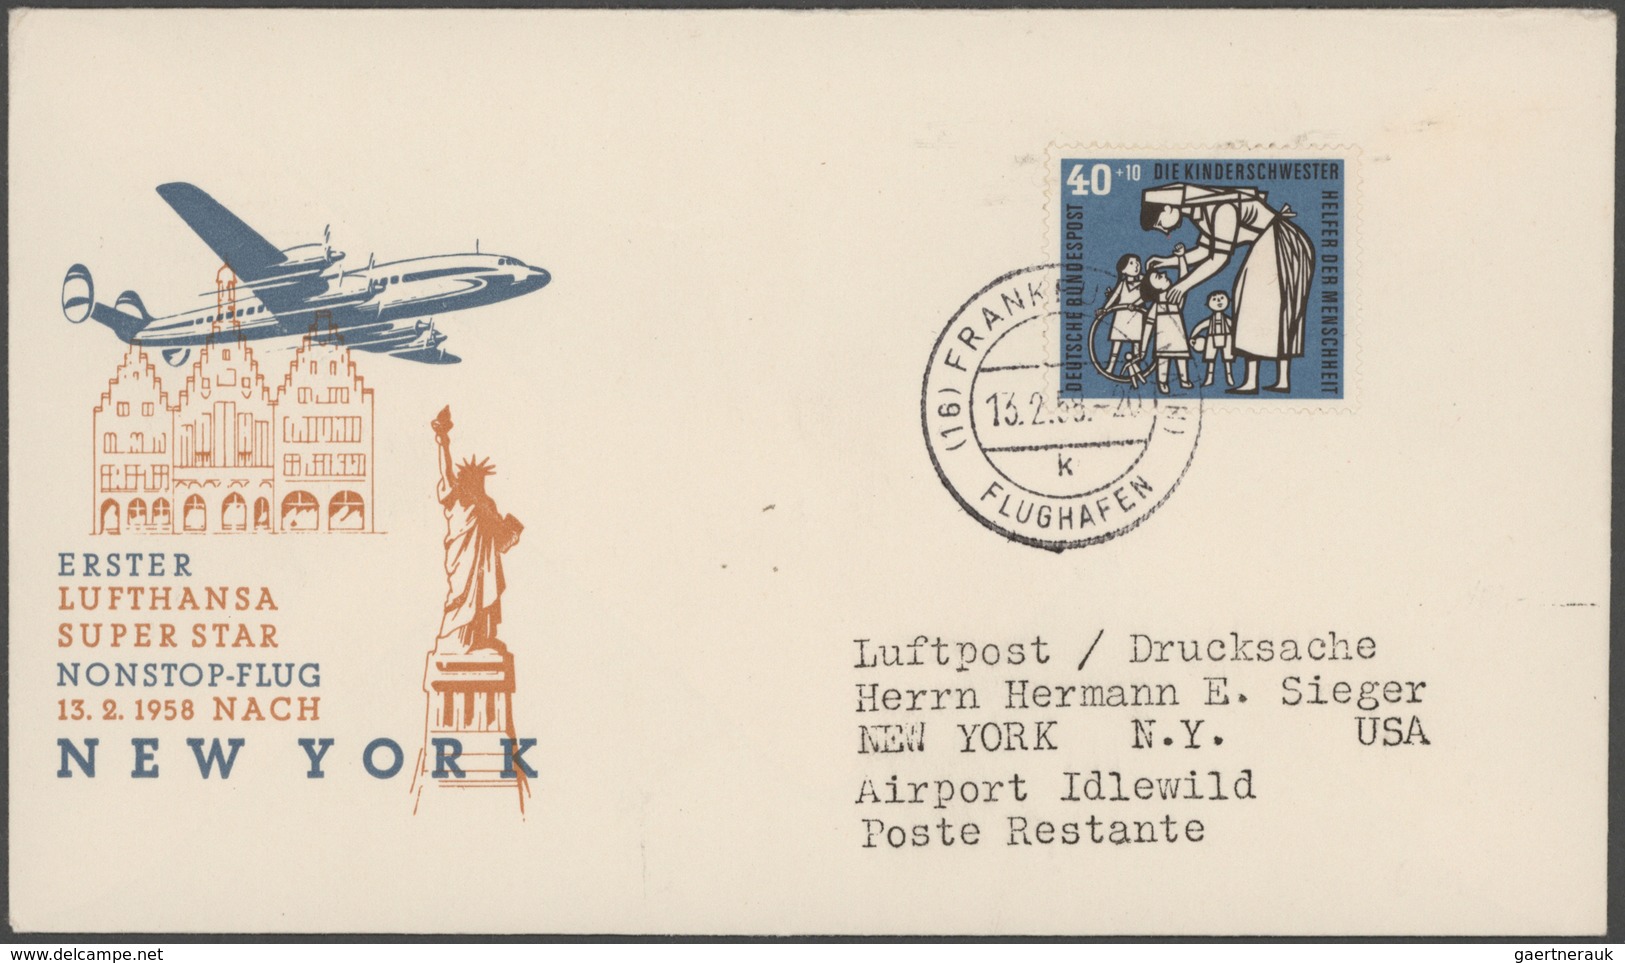 Flugpost Alle Welt: 1955/1992, LUFTHANSA FIRST FLIGHTS, collection of more than 2.000 different firs